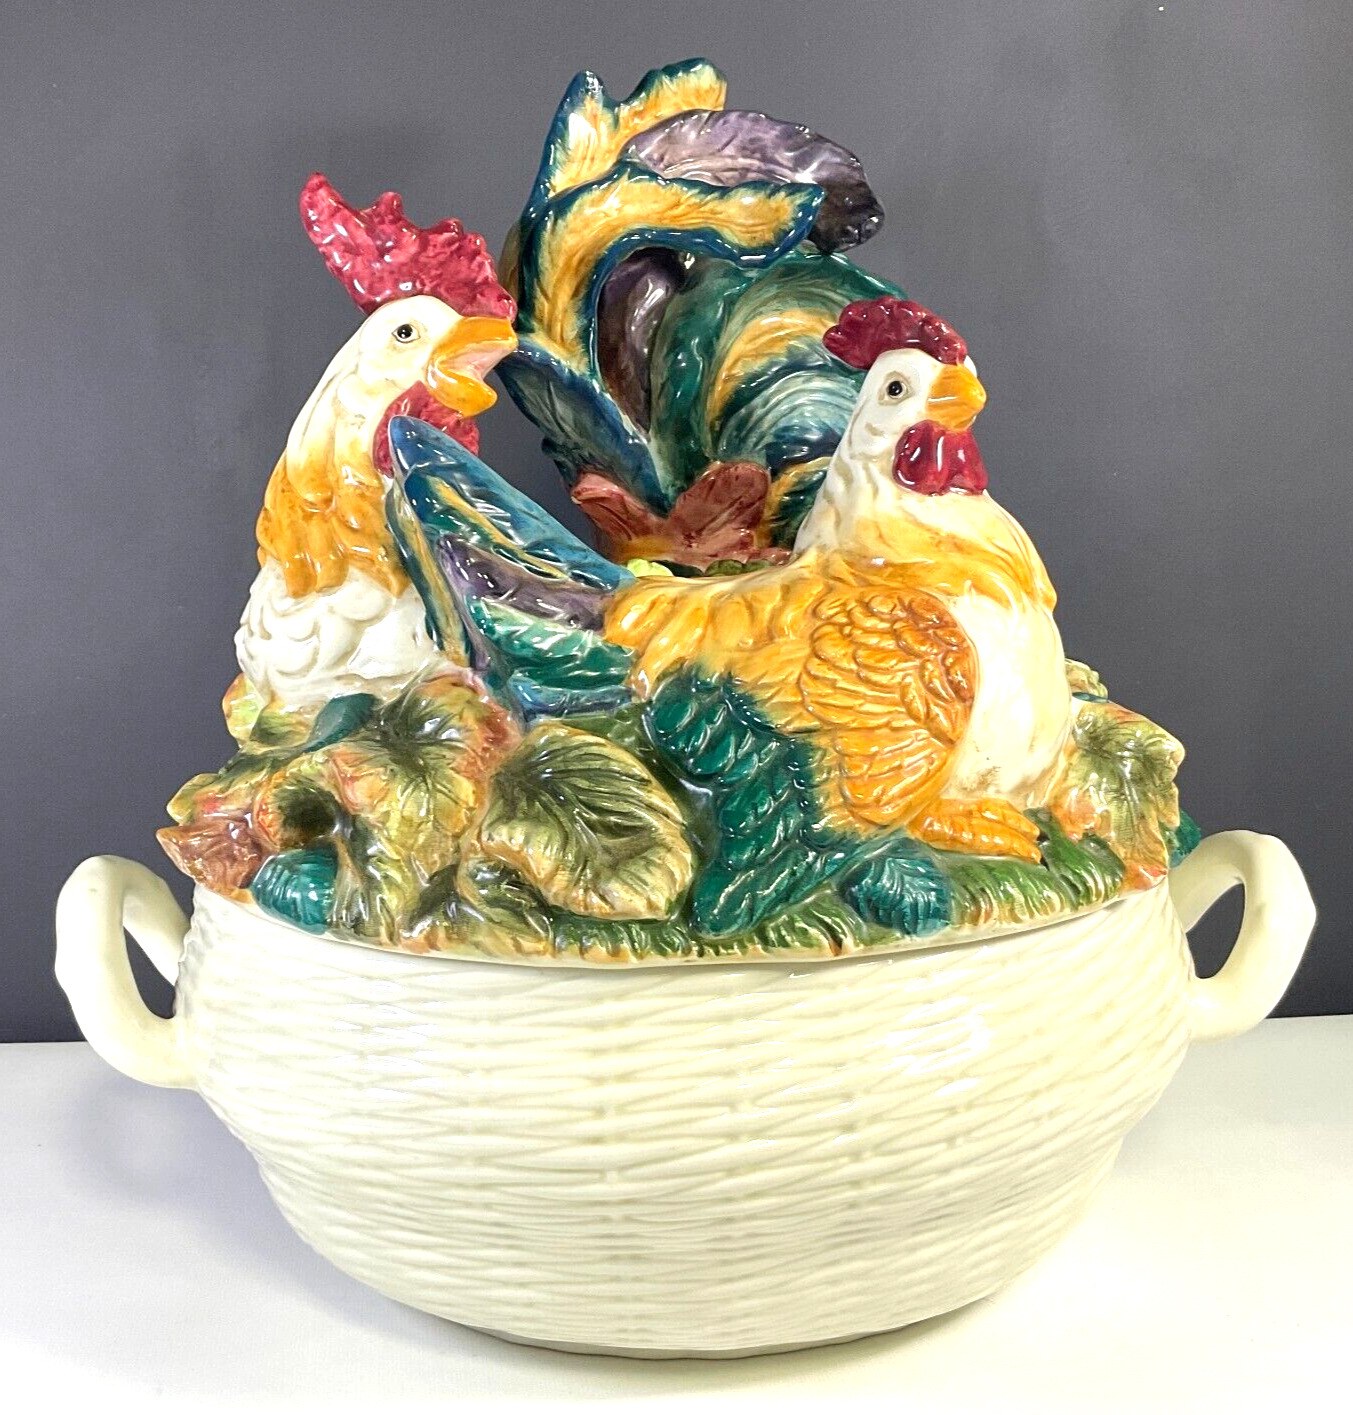 Kaldun and Bogle Tuscan Rooster & Hen Covered Tureen French Country Vintage